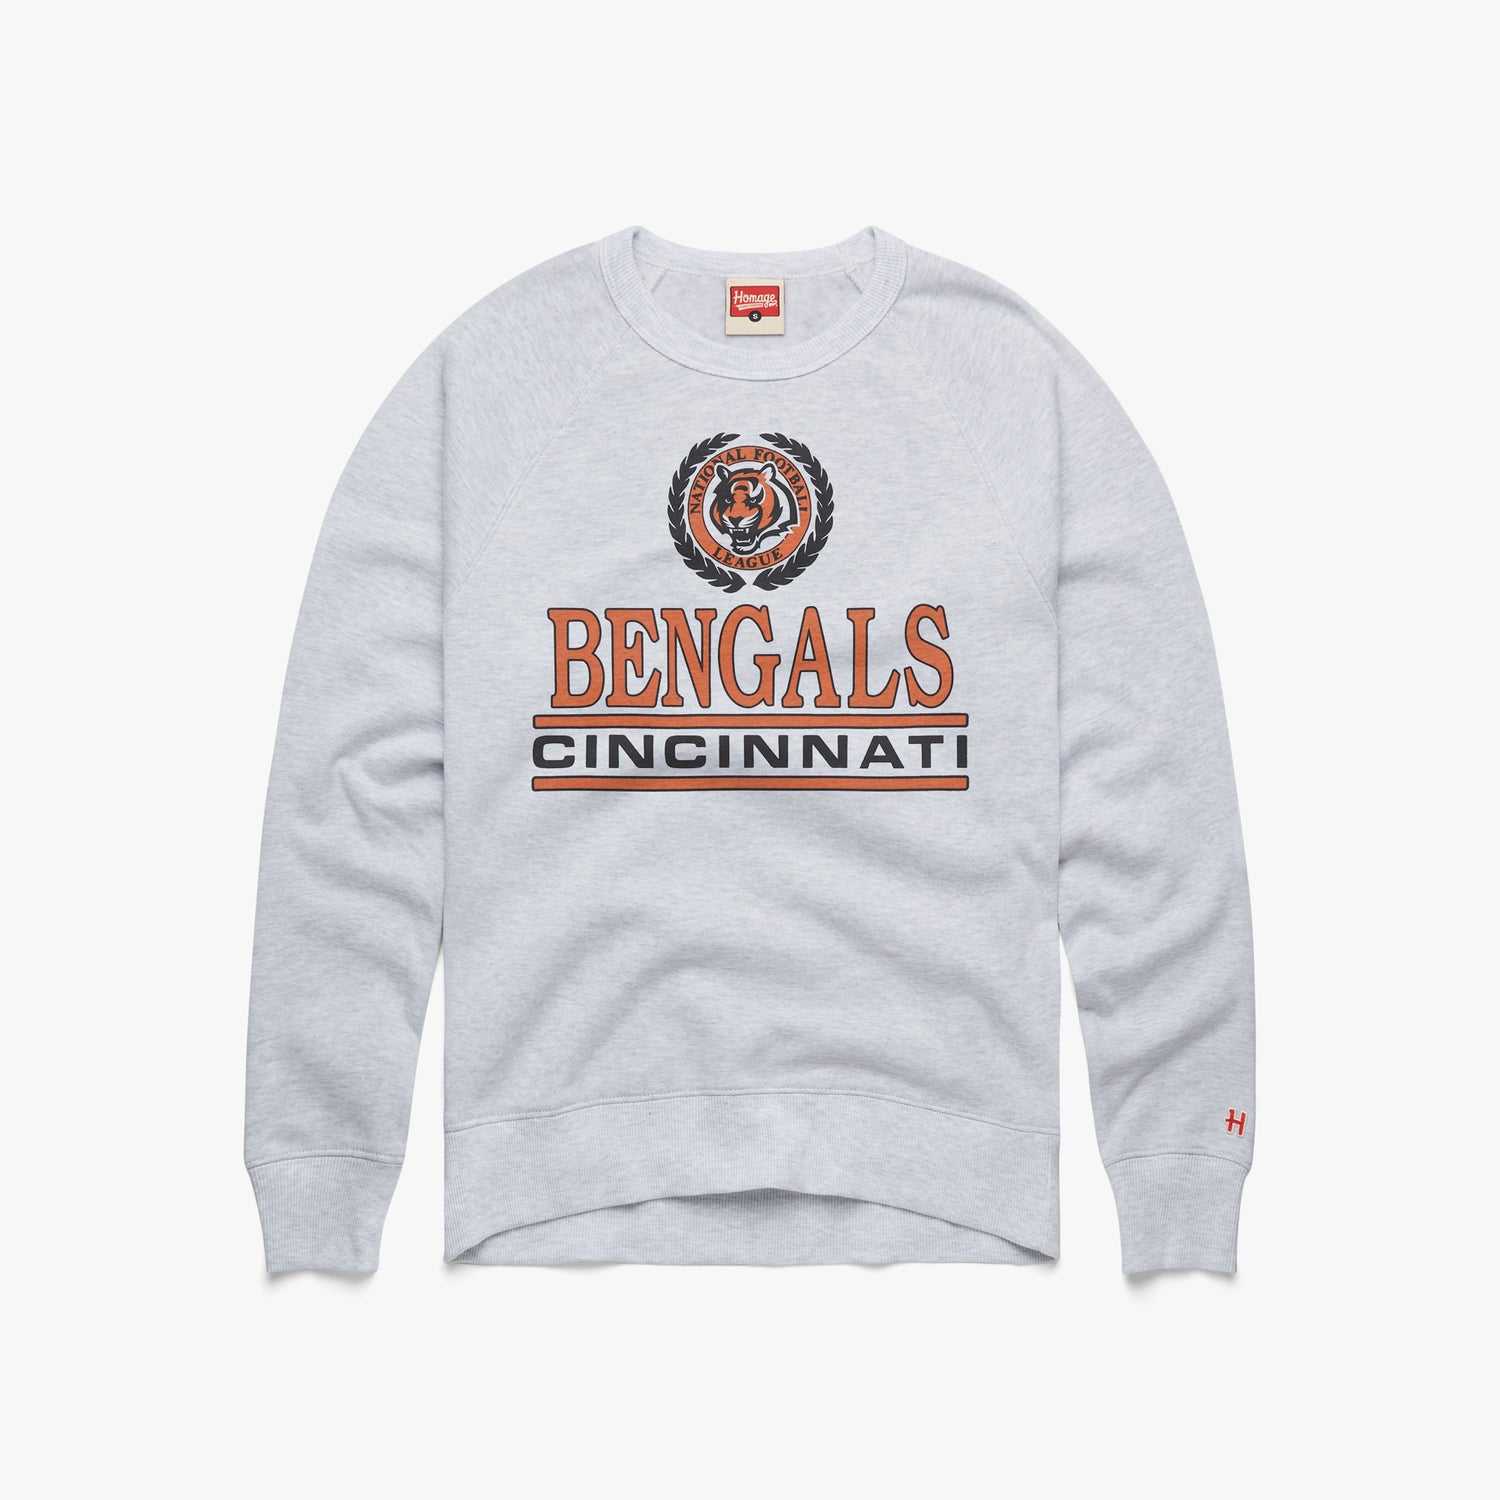 Shop the best Bengals gear for the 2023 season